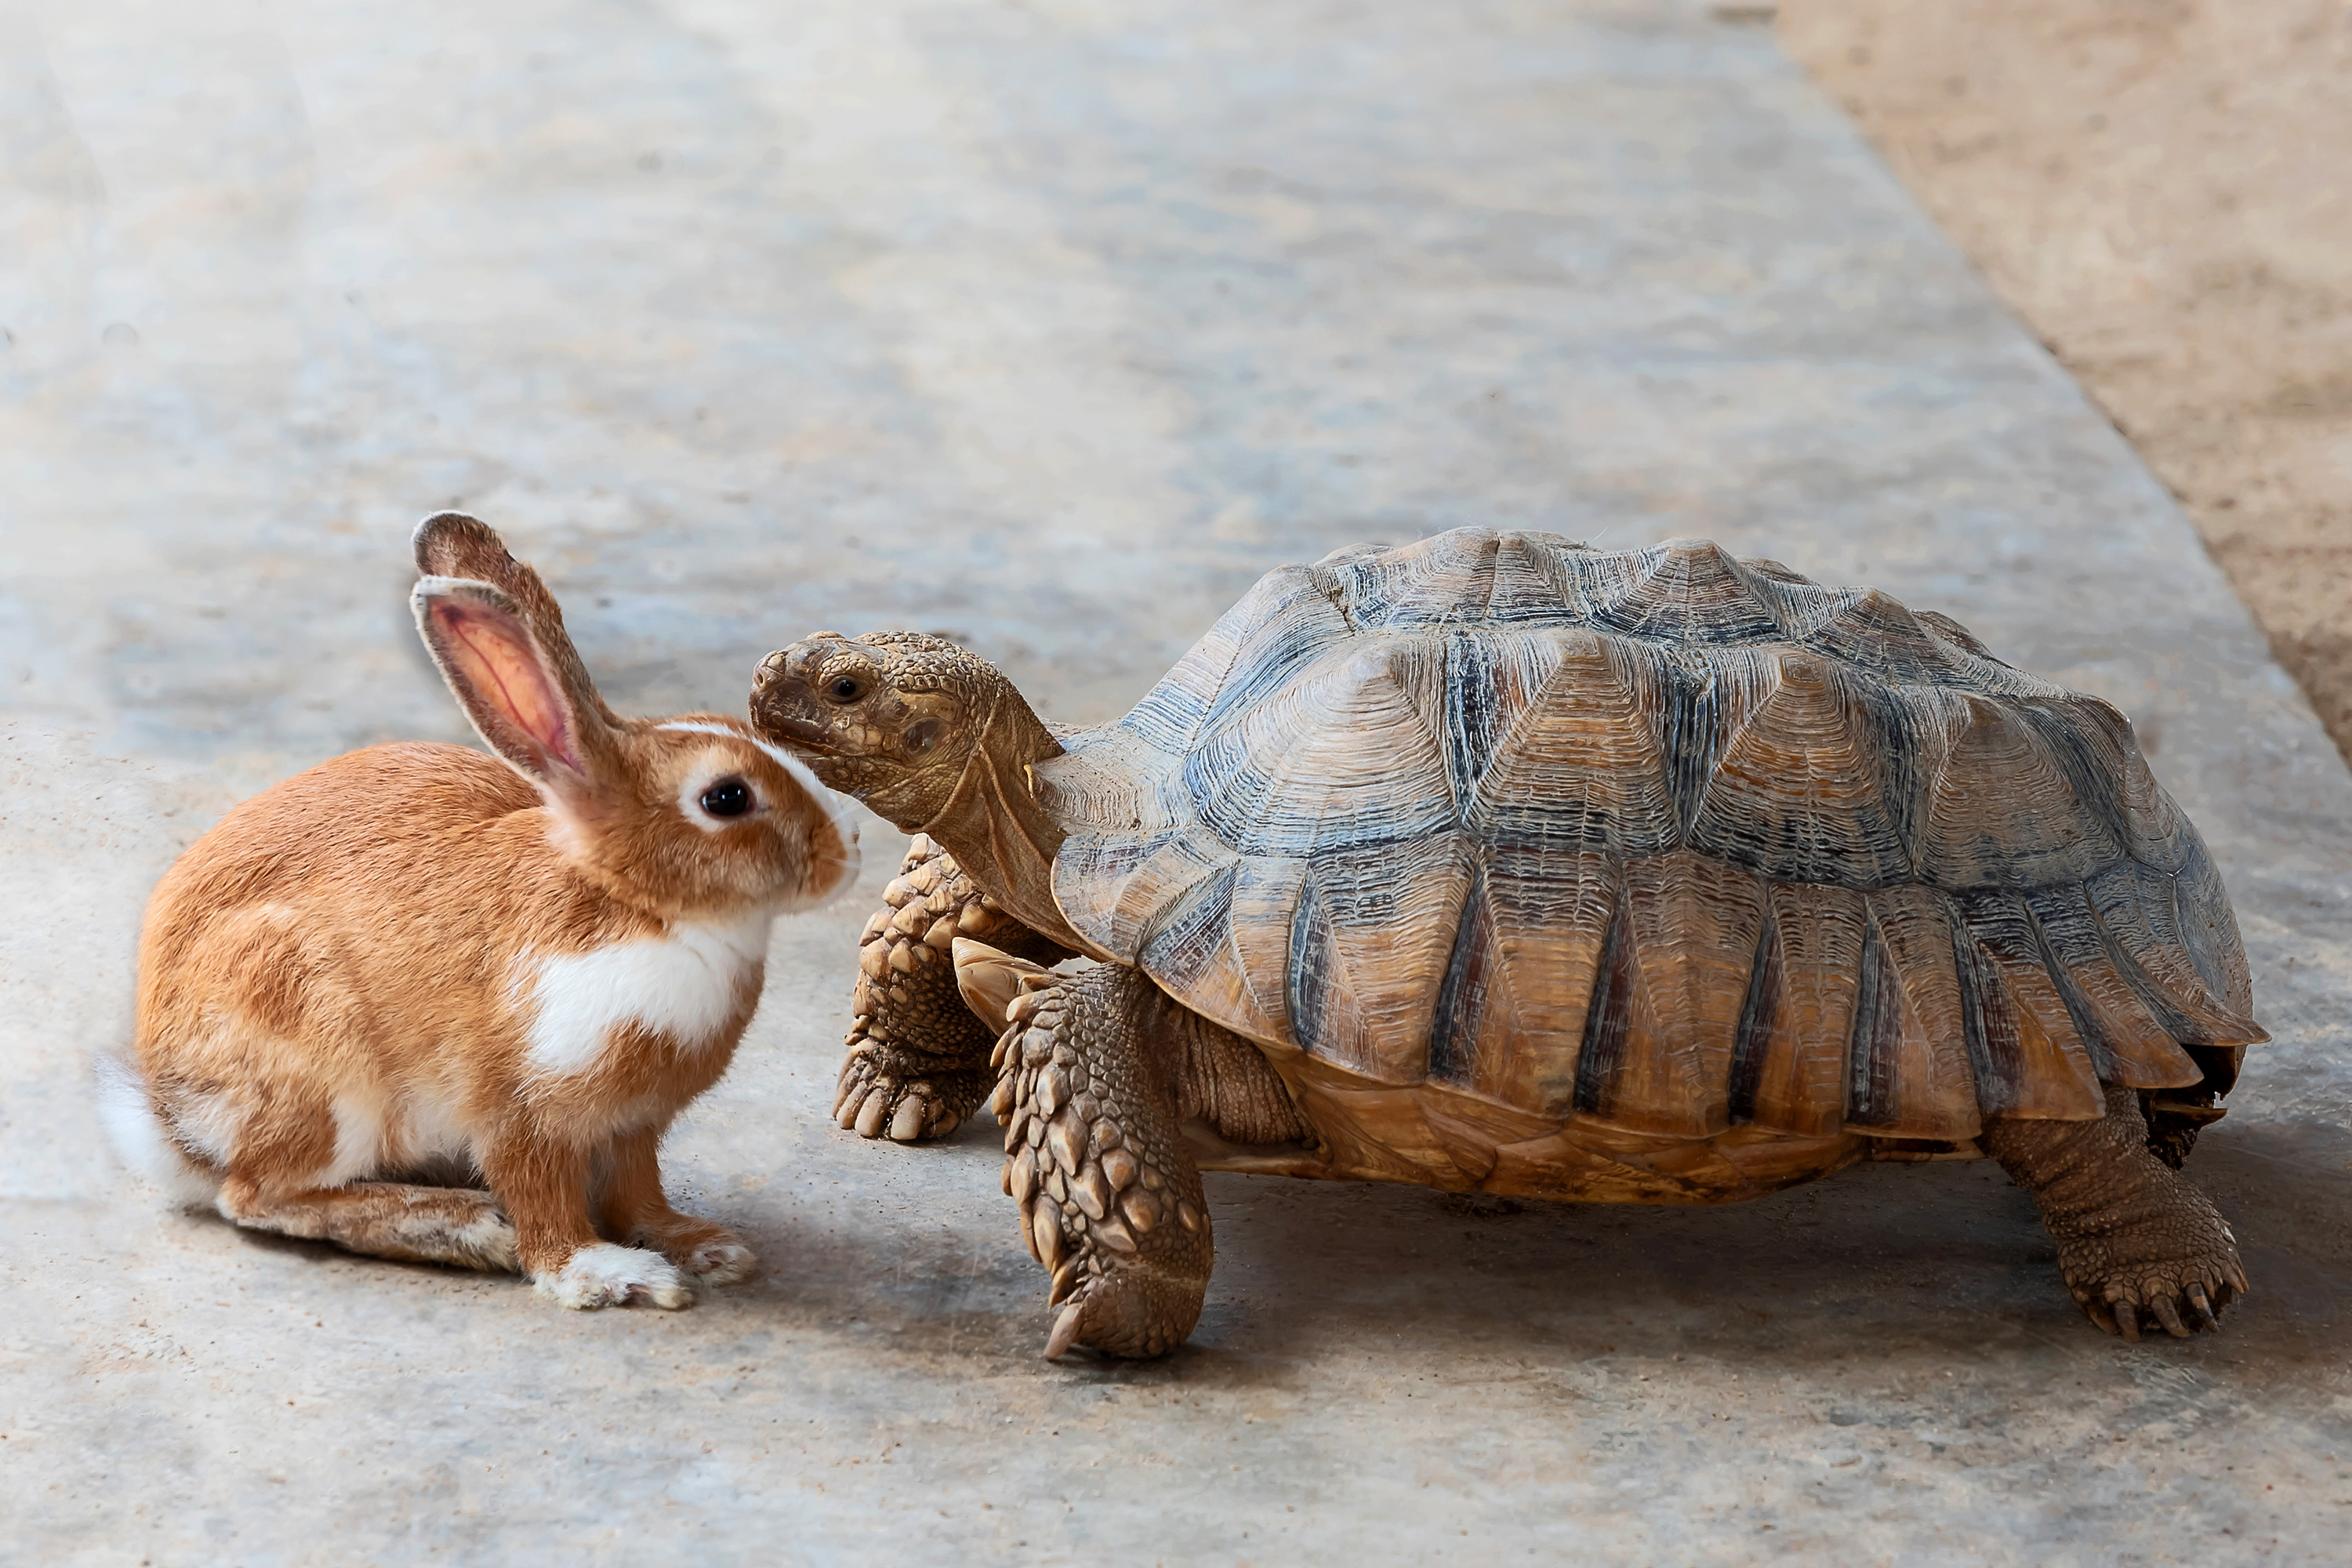 an image of a tortoise and a hare